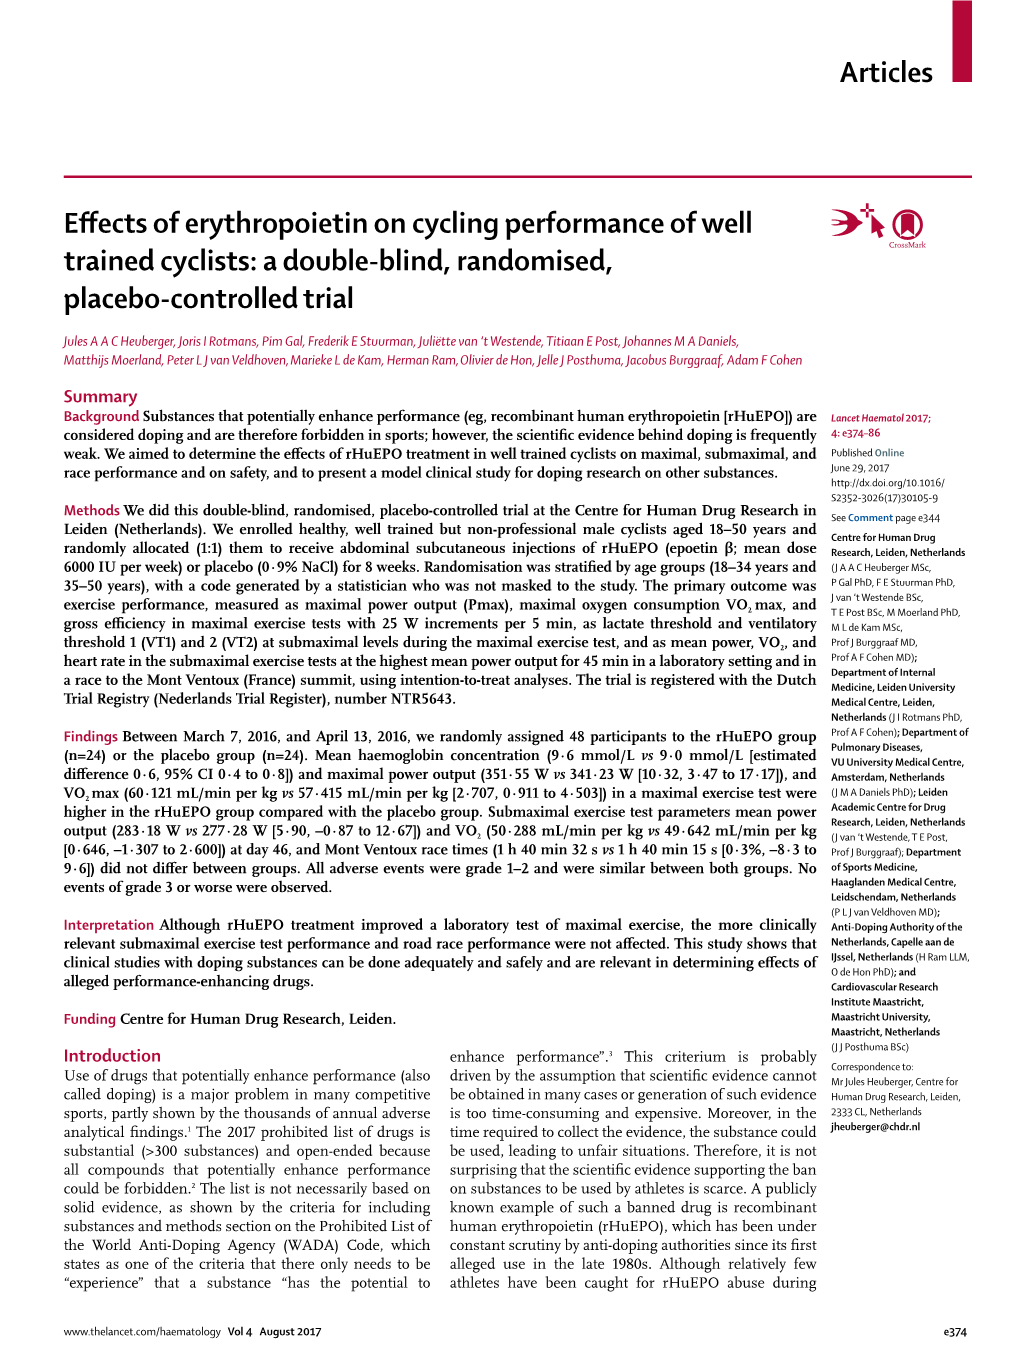 Effects of Erythropoietin on Cycling Performance of Well Trained Cyclists: a Double-Blind, Randomised, Placebo-Controlled Trial